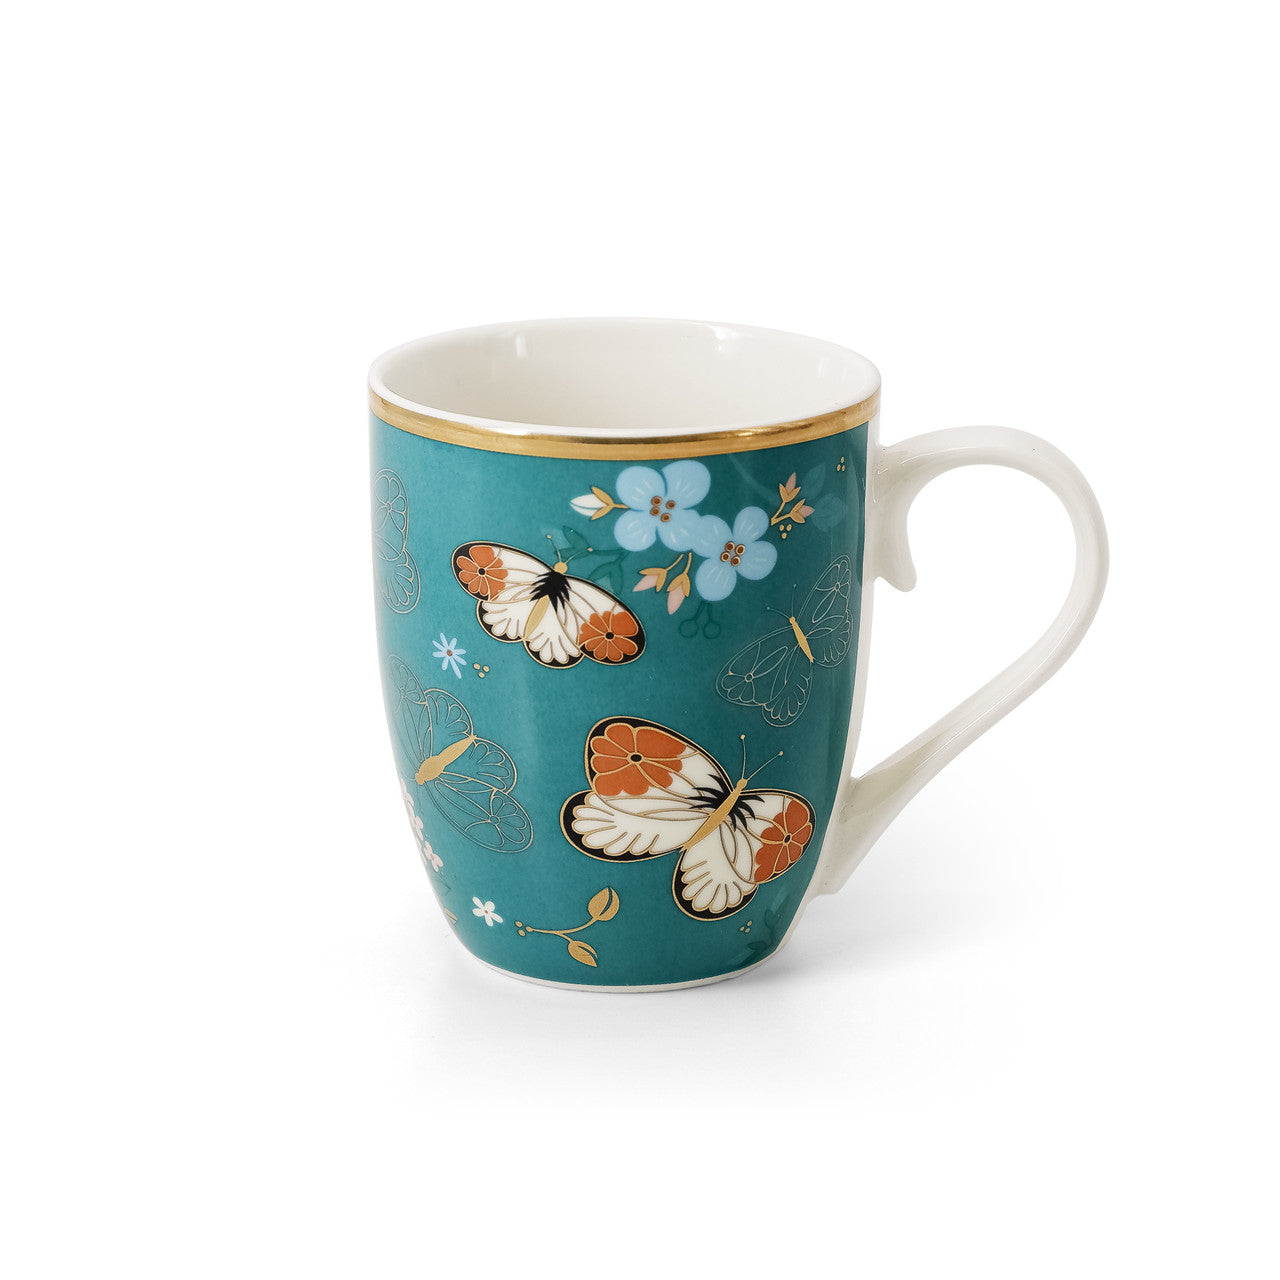 Tipperary Crystal Butterfly Mugs Set of 4  Drawing inspiration from urban garden, the Tipperary Crystal Butterfly collection transforms an icon into something modern and unexpected. Playful and elegant, this collection draws from the inherent beauty of the butterfly.